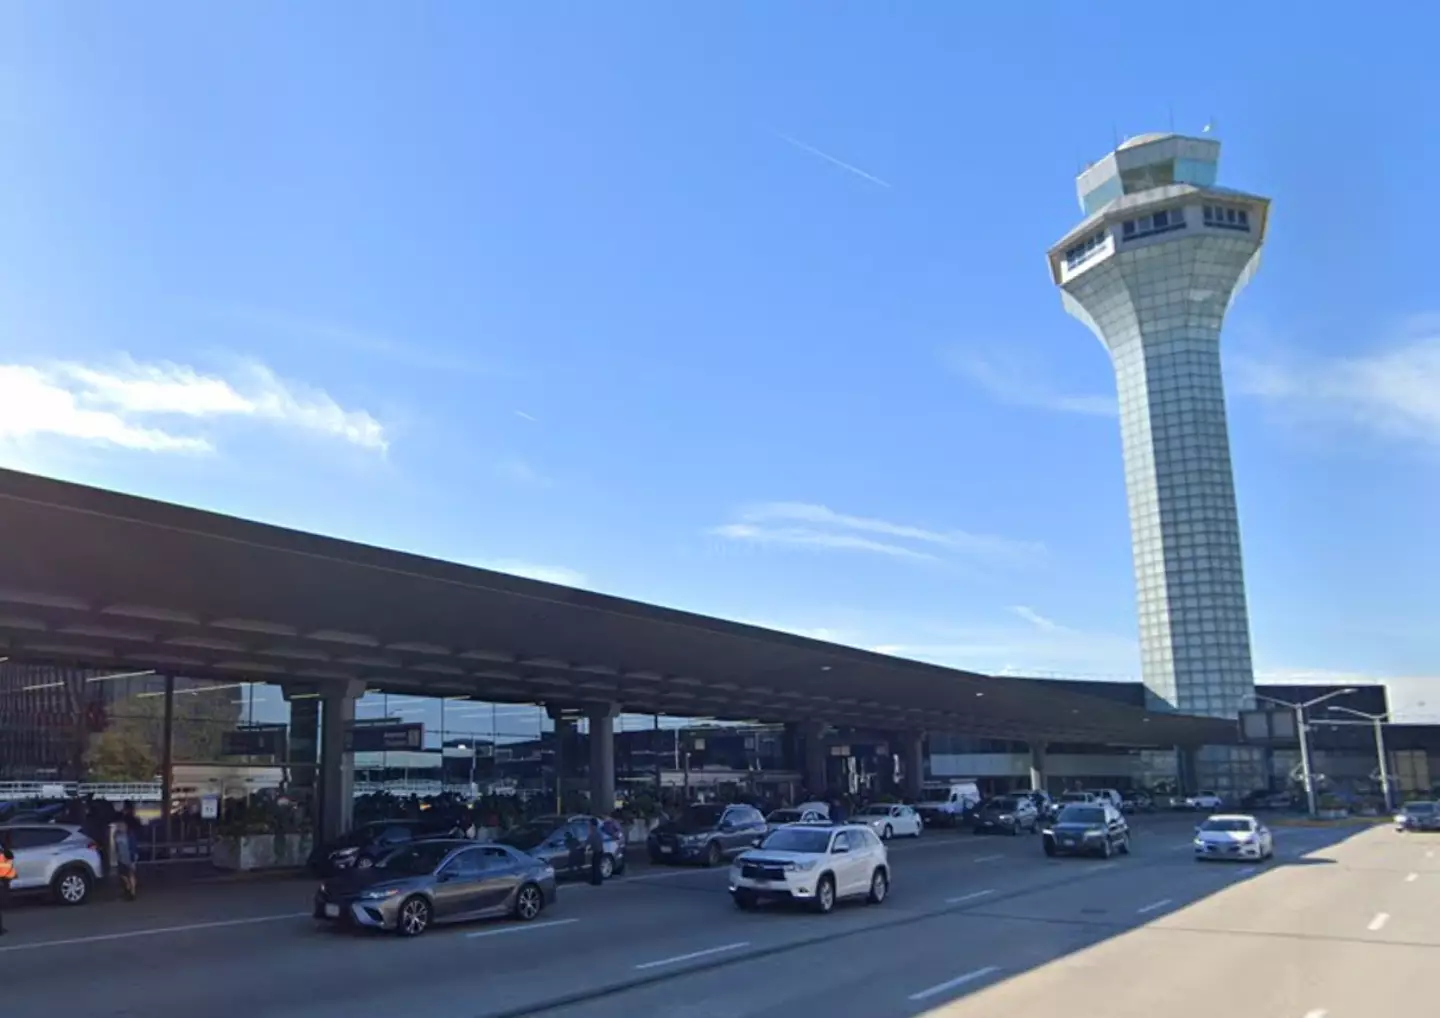 O'Hare International Airport, where the incident took place.